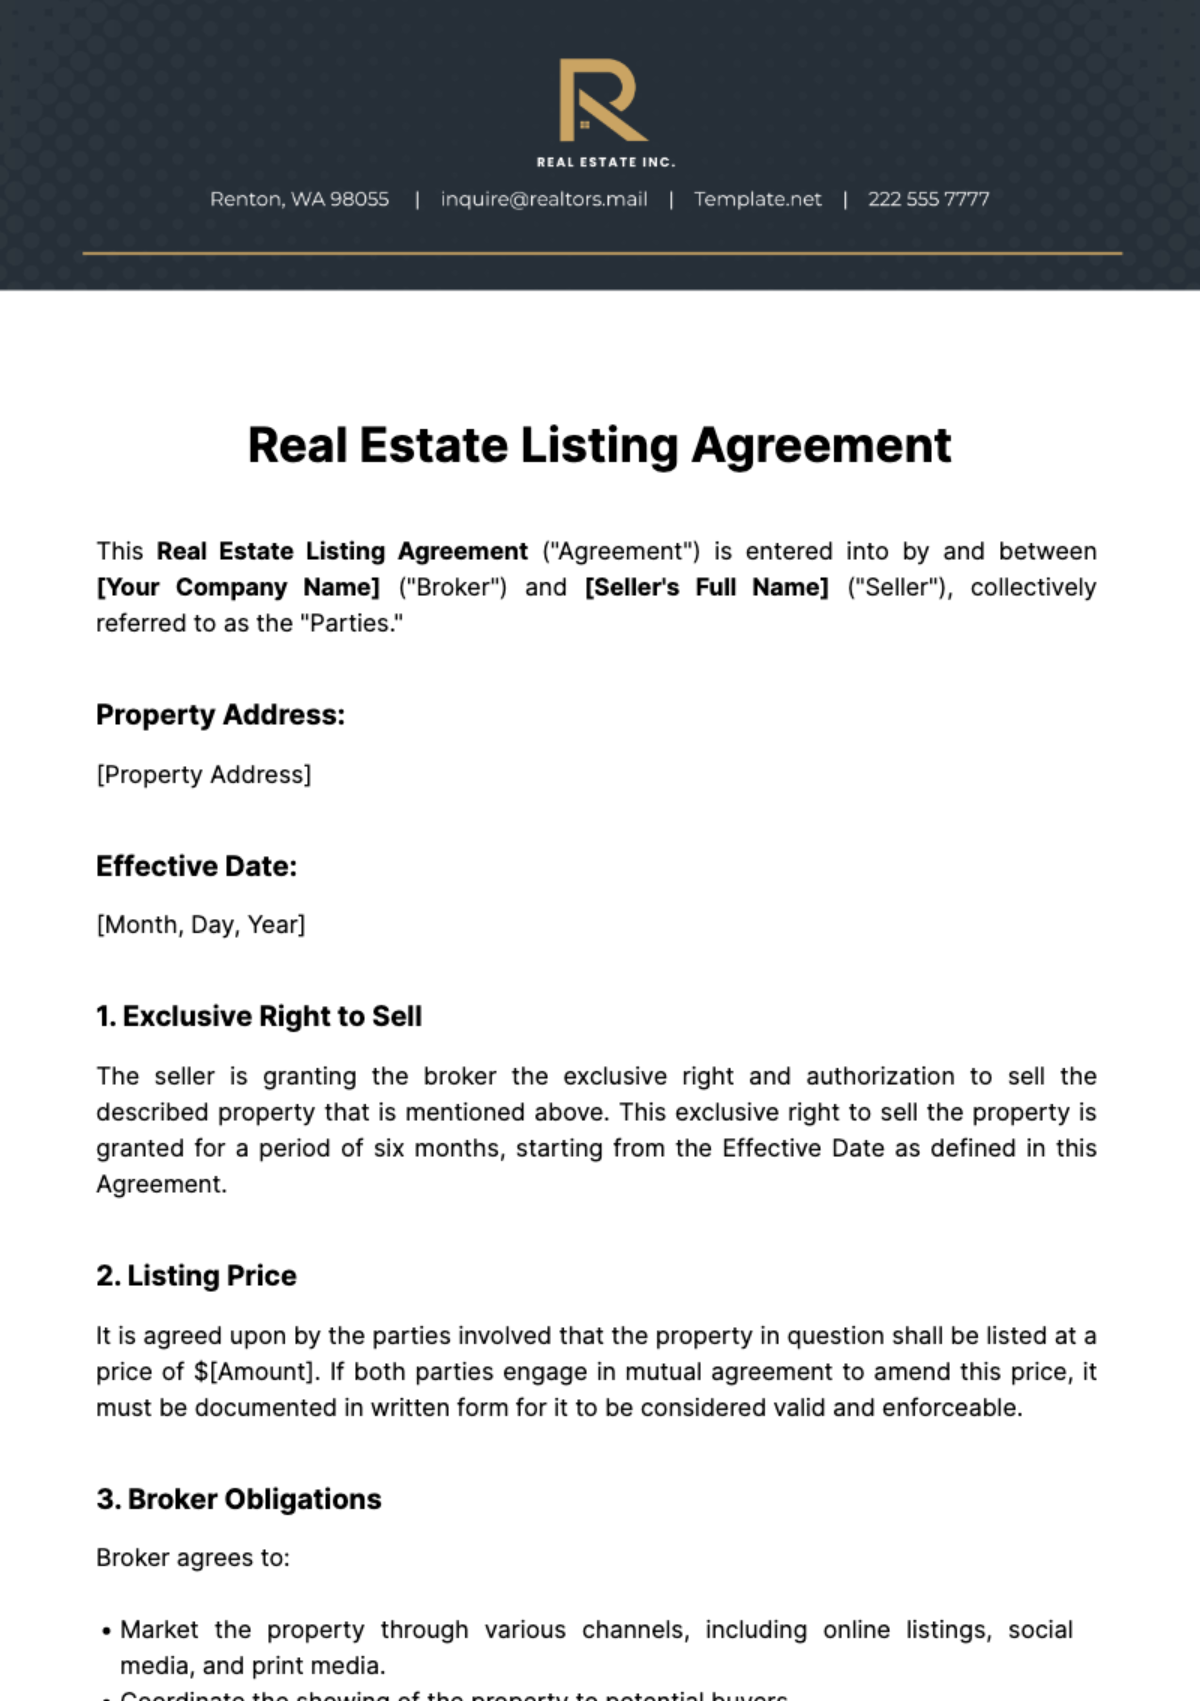 Real Estate Listing Agreement Template